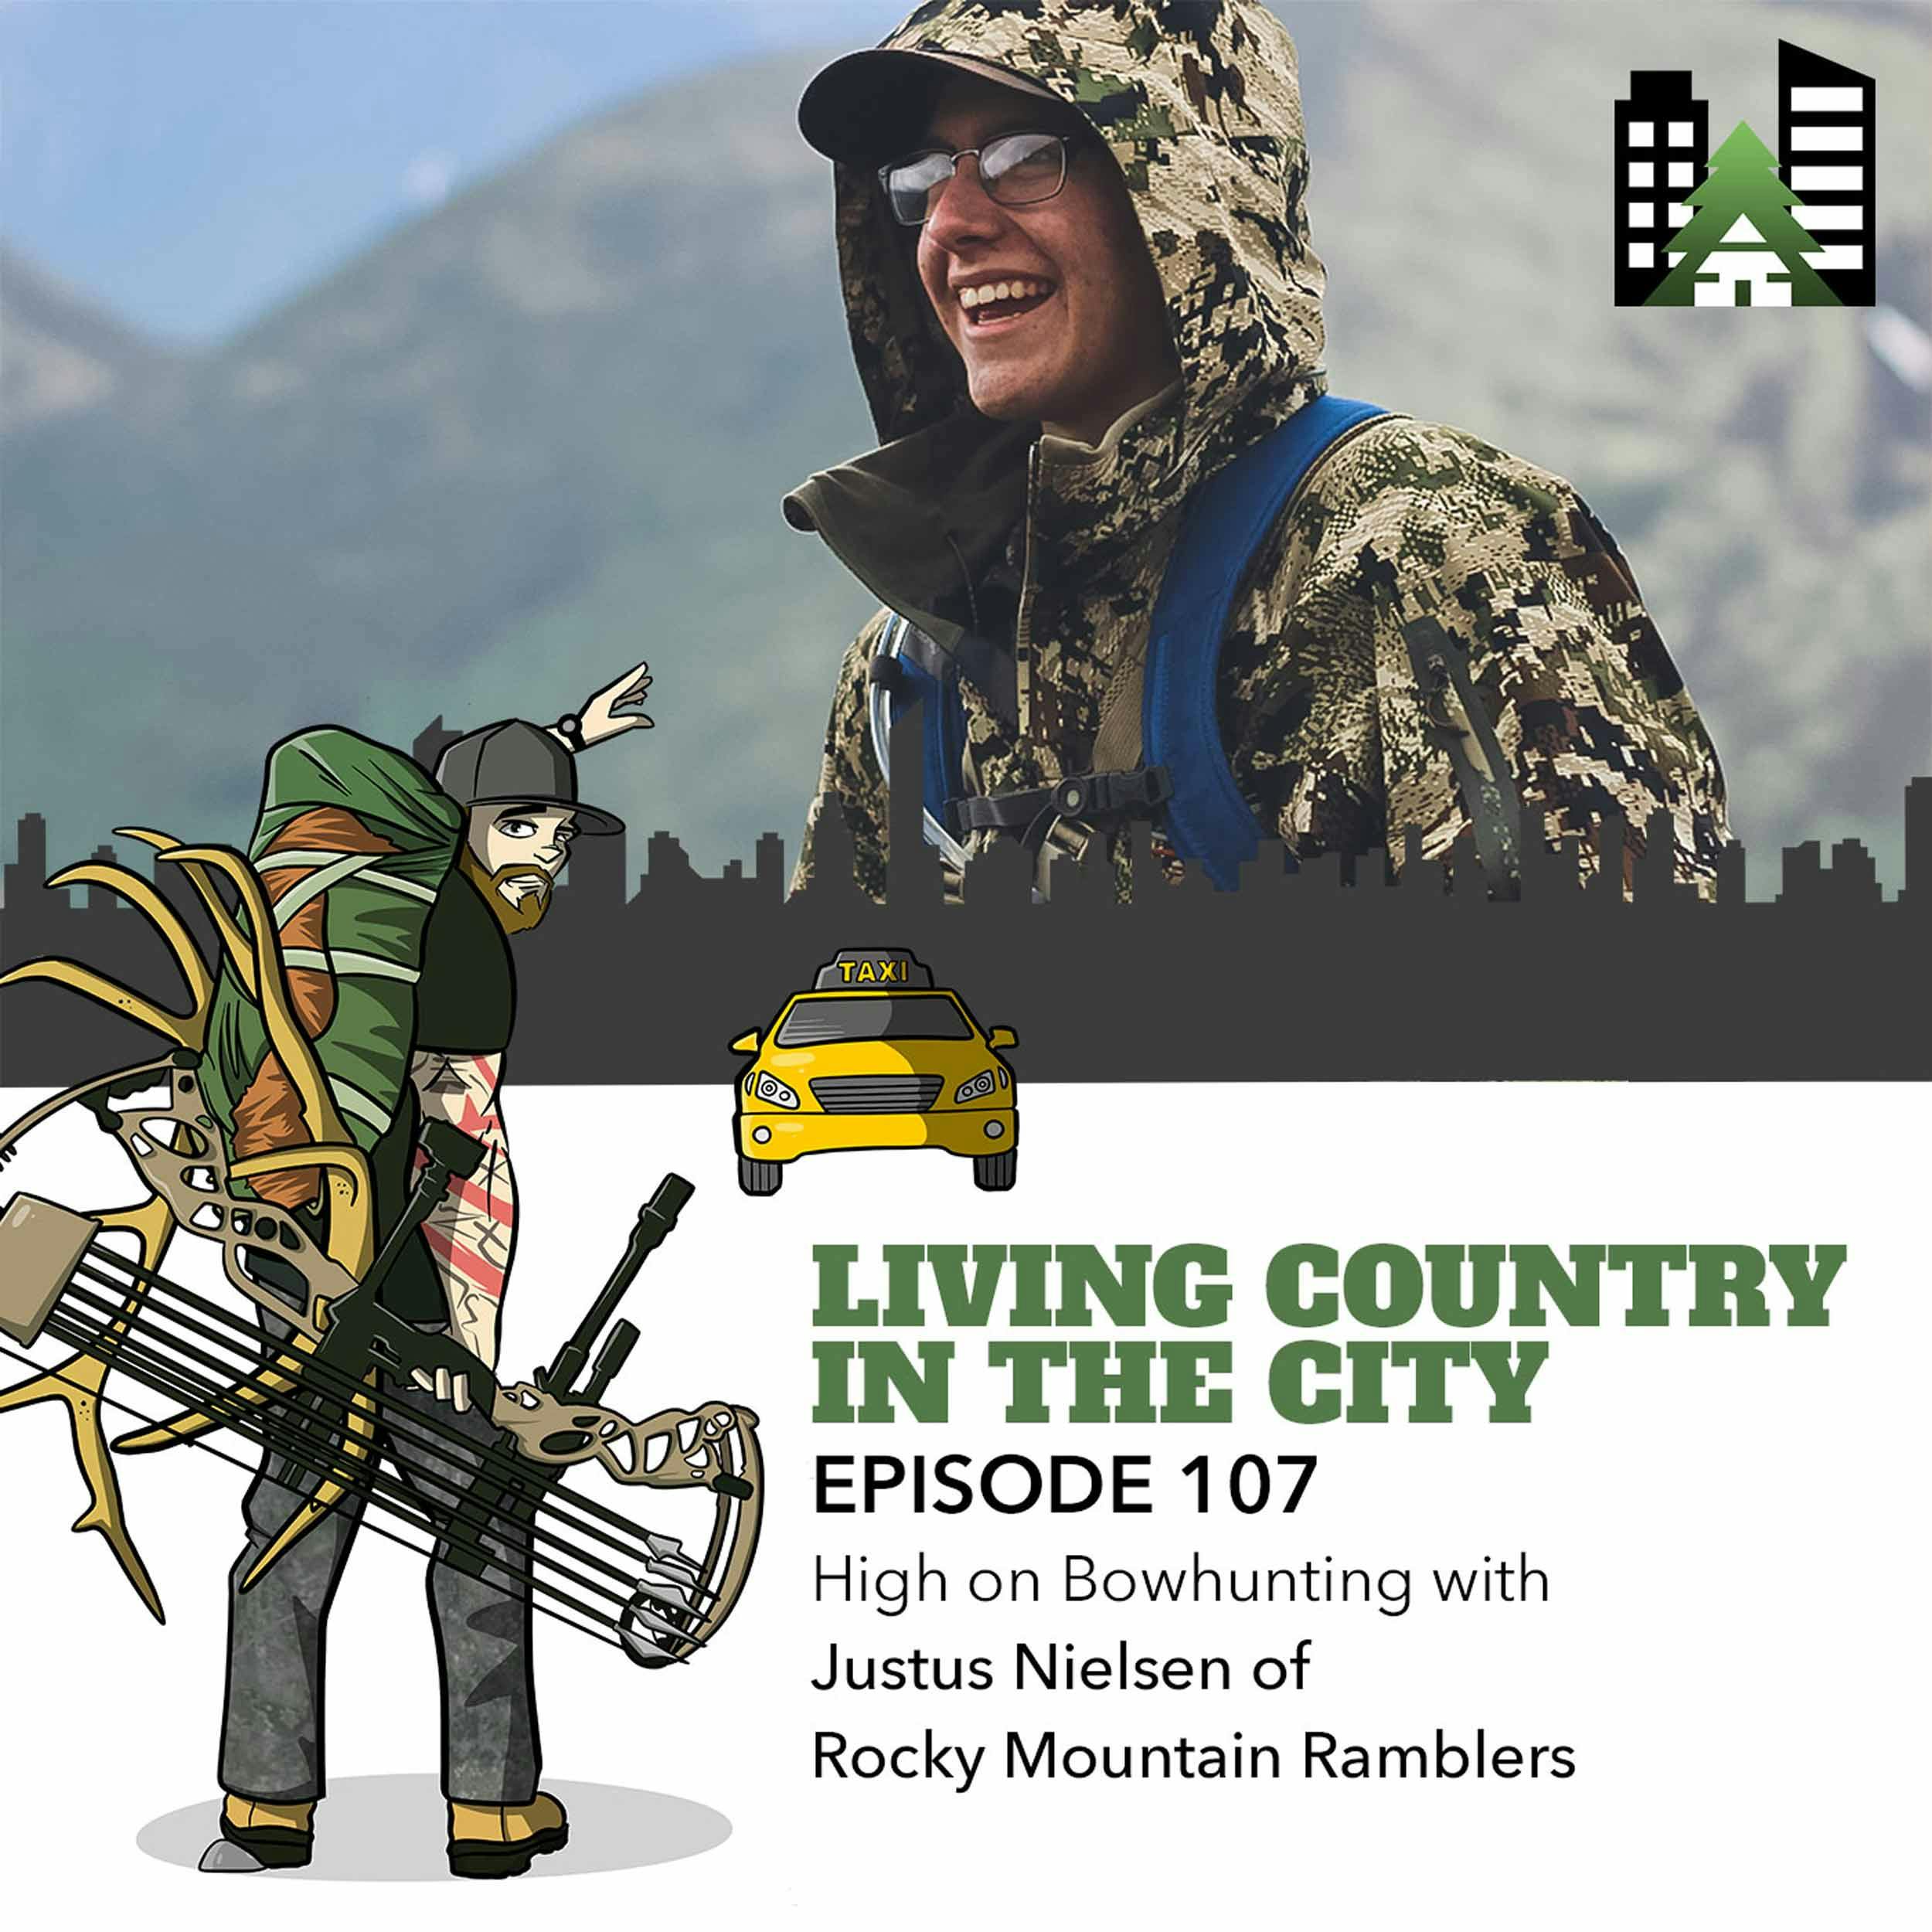 Ep 107 - High on Bowhunting with Justus Nielsen of Rocky Mountain Ramblers